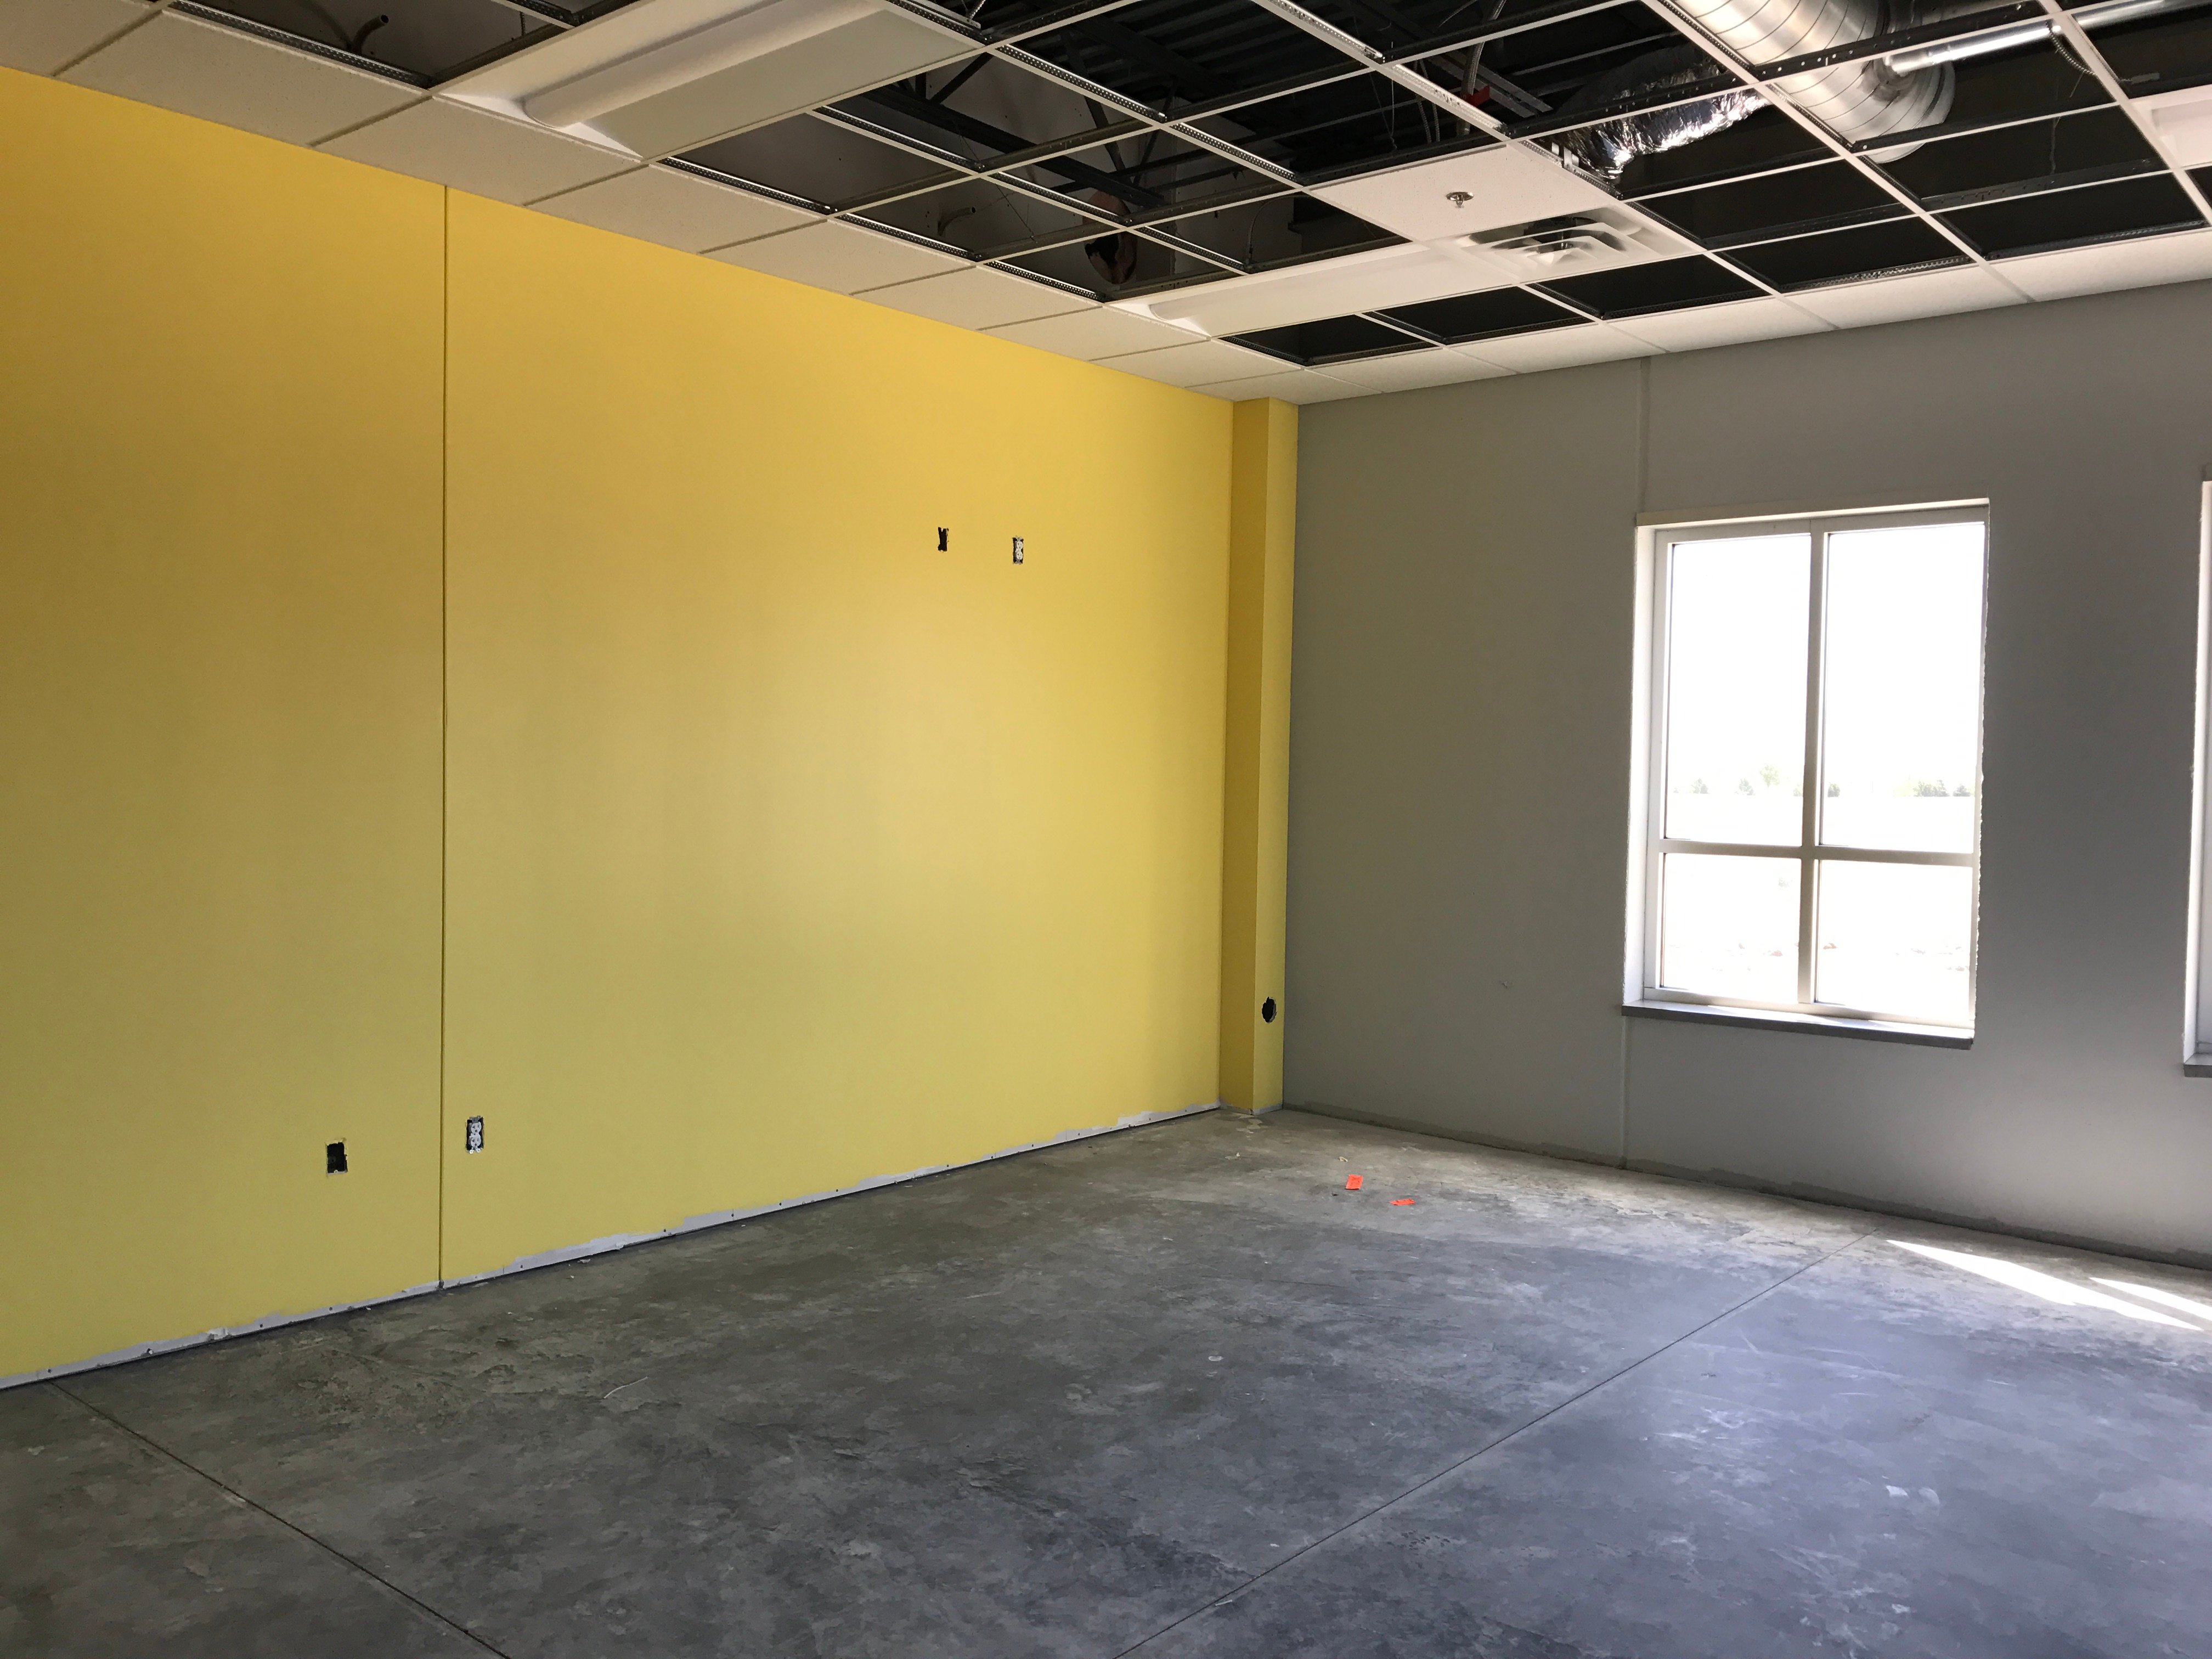 School construction project - classroom with yellow walls.jpg